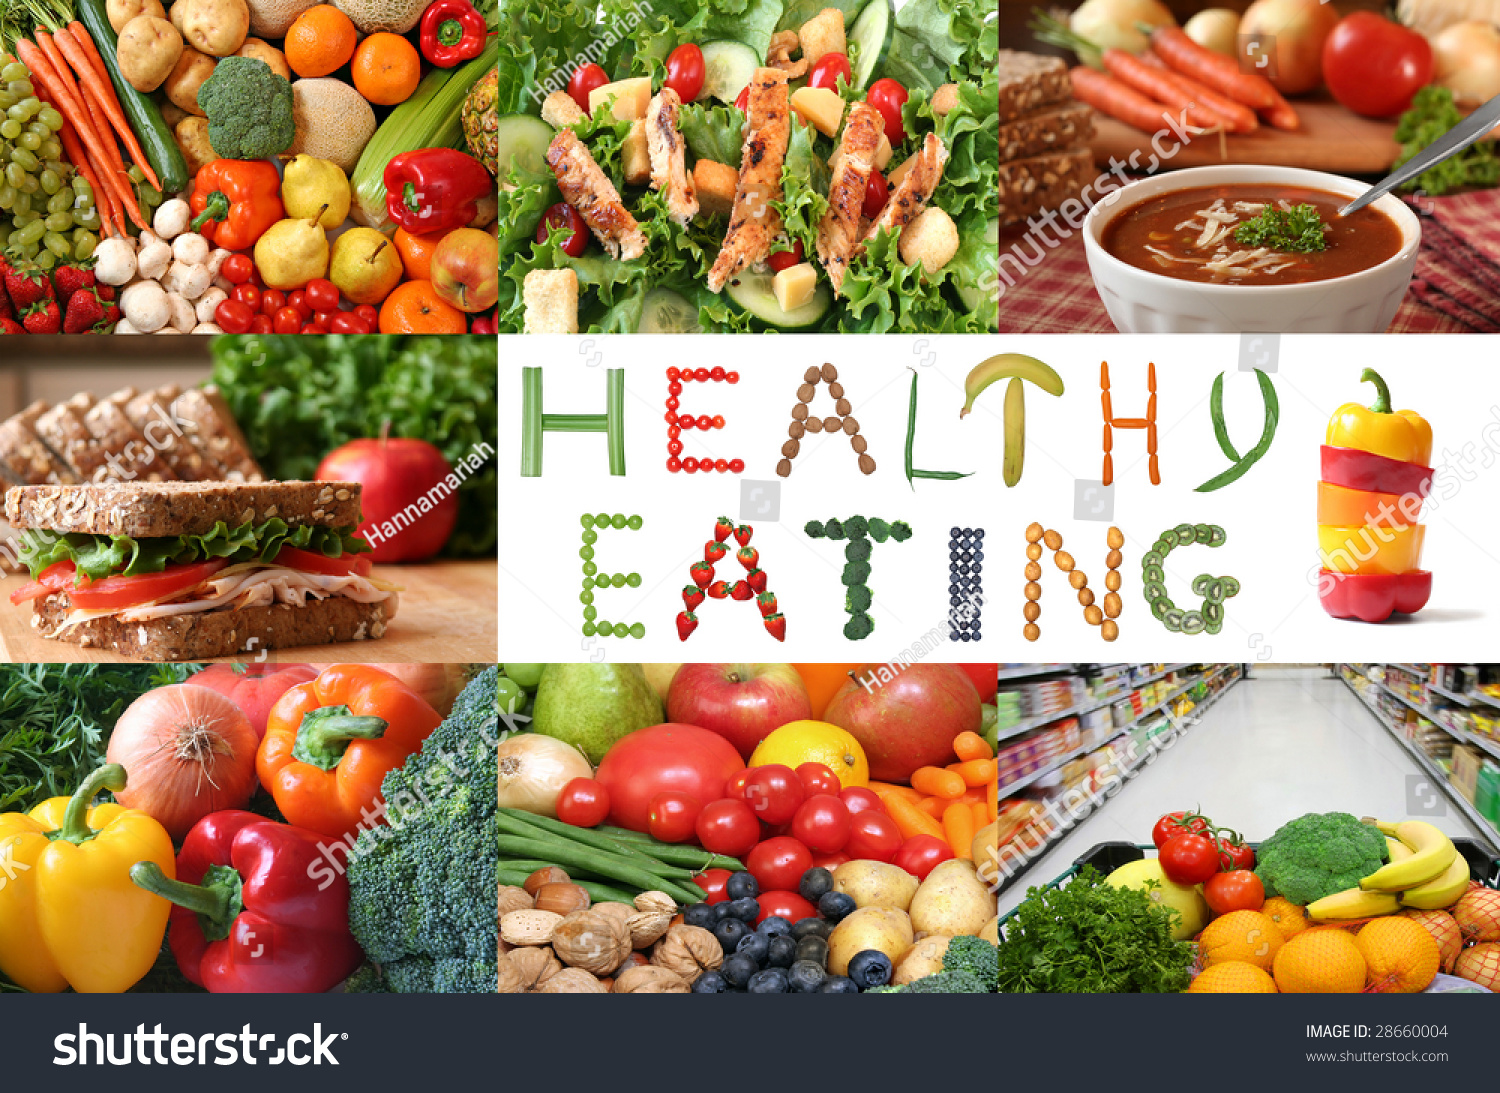 Healthy Eating Collage Lots Fruits Vegetables Stock Photo 28660004 ...